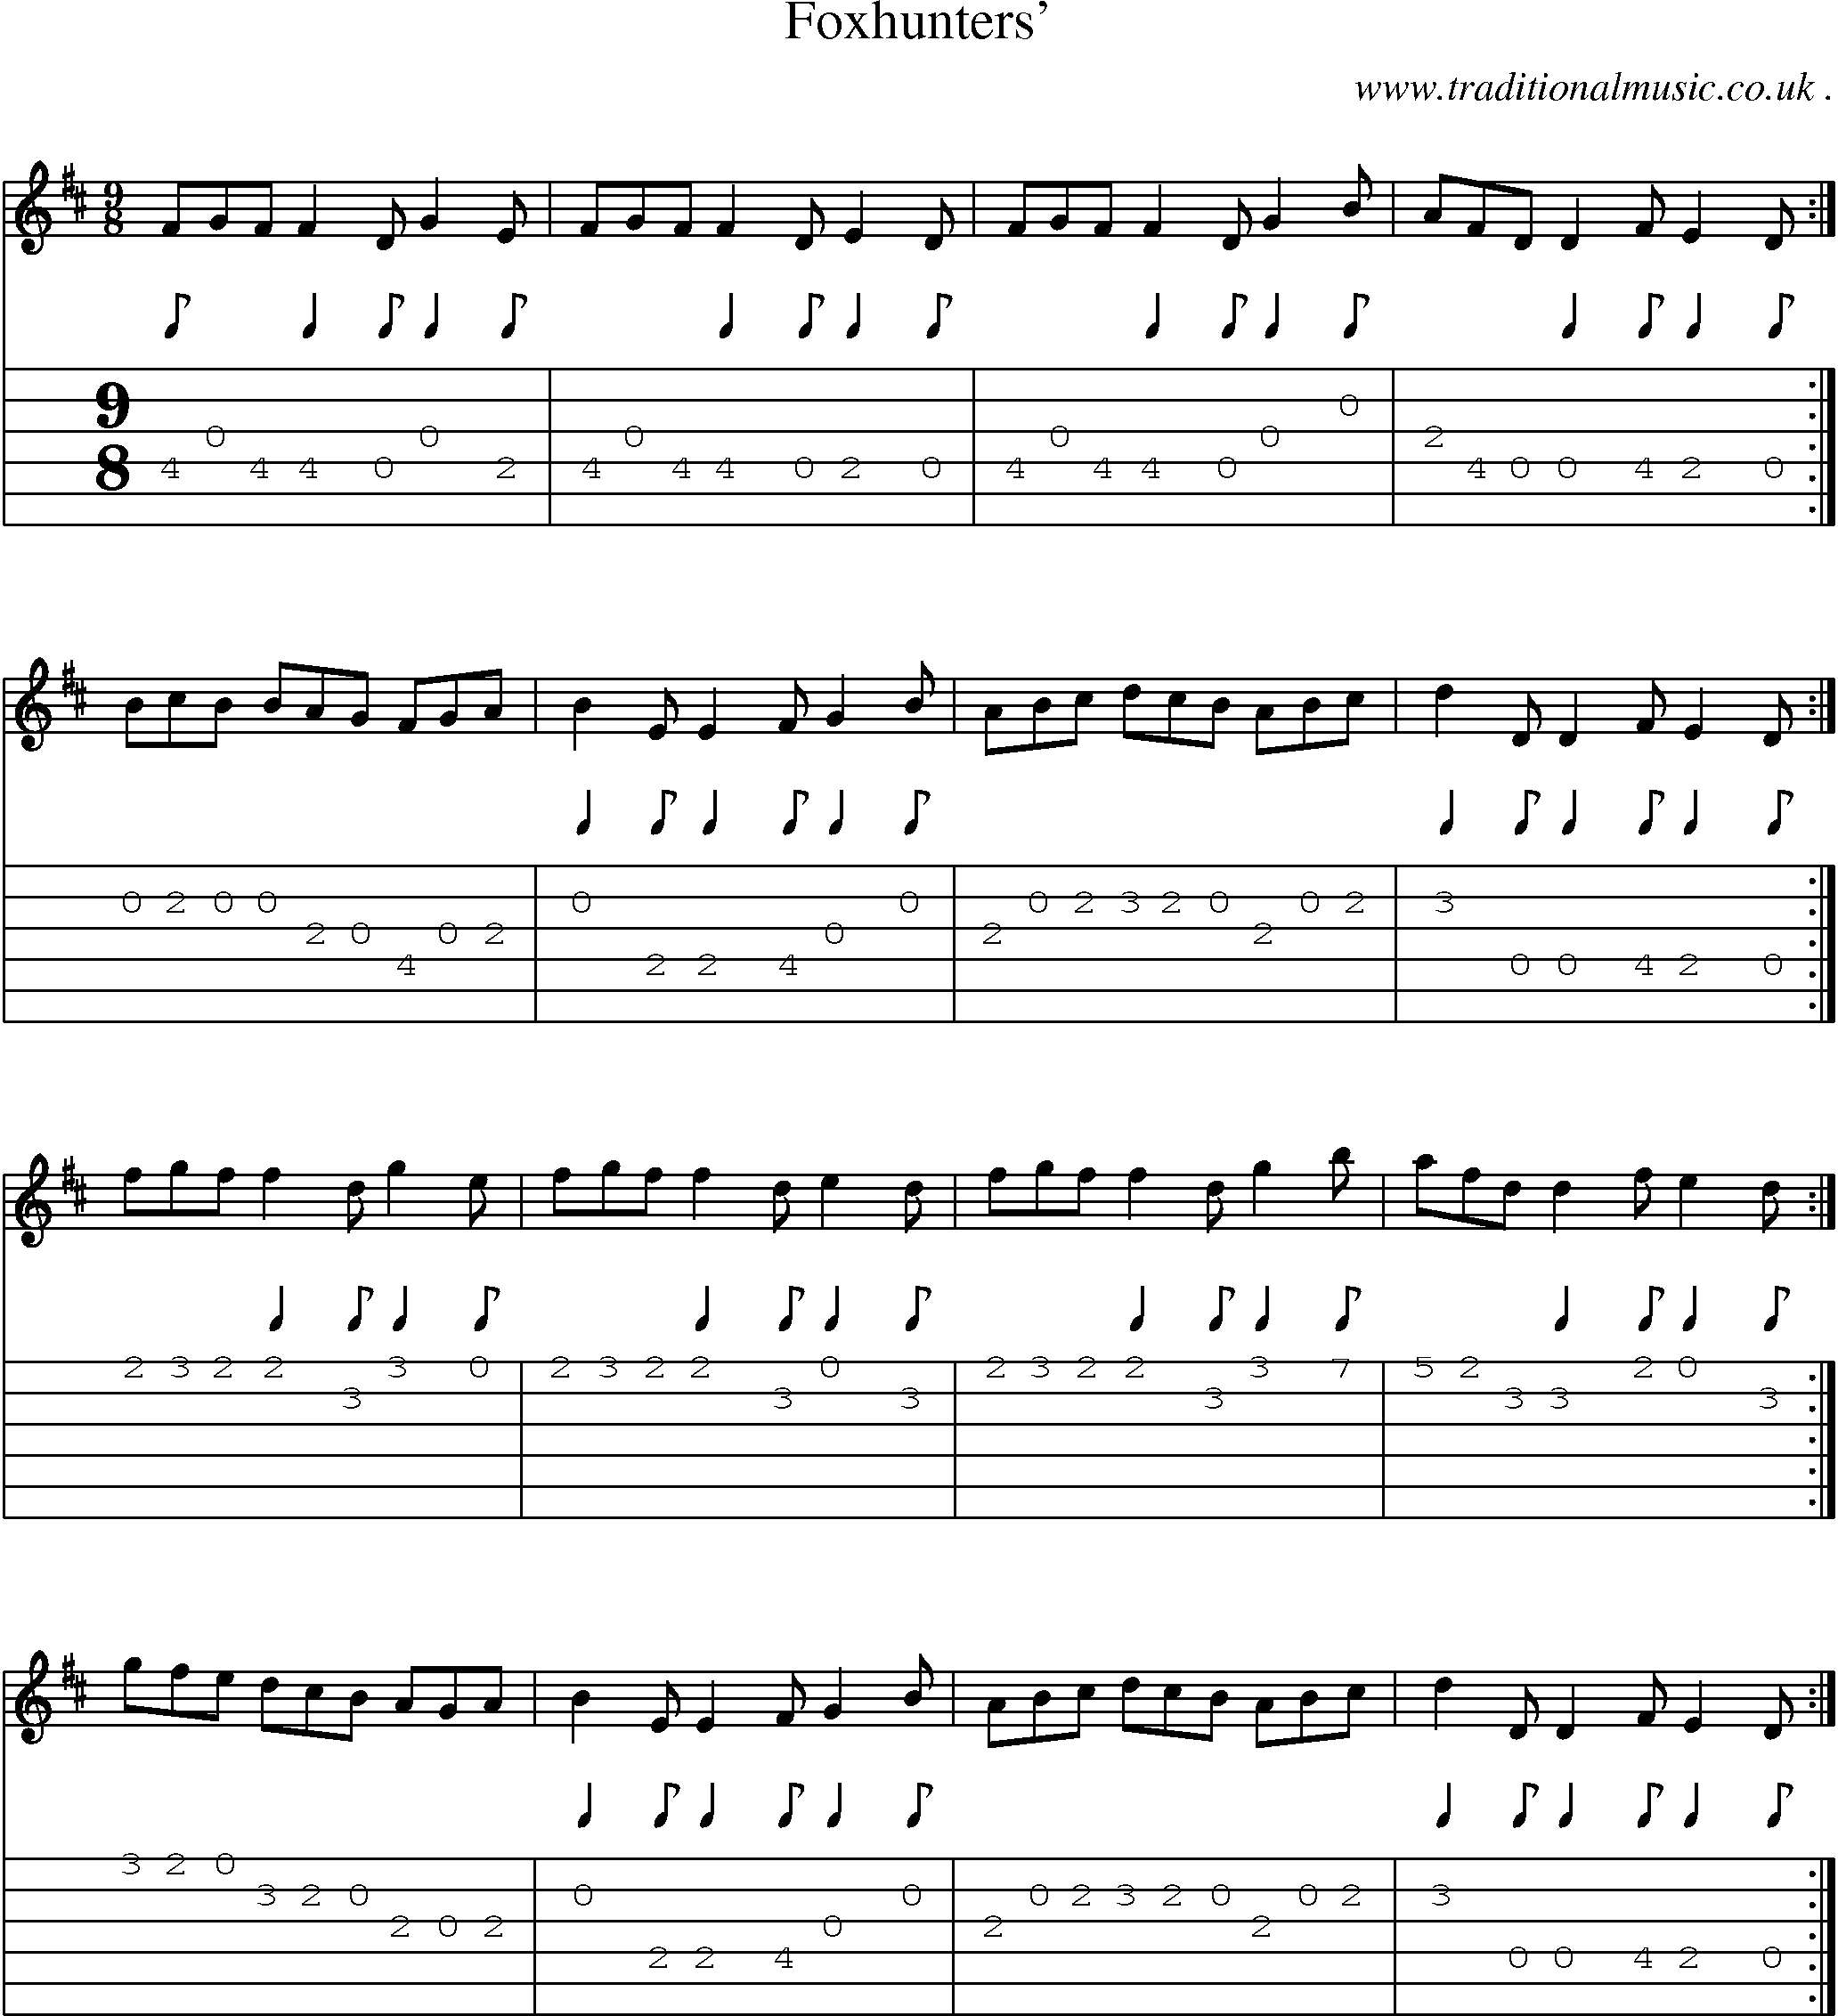 Sheet-Music and Guitar Tabs for Foxhunters1